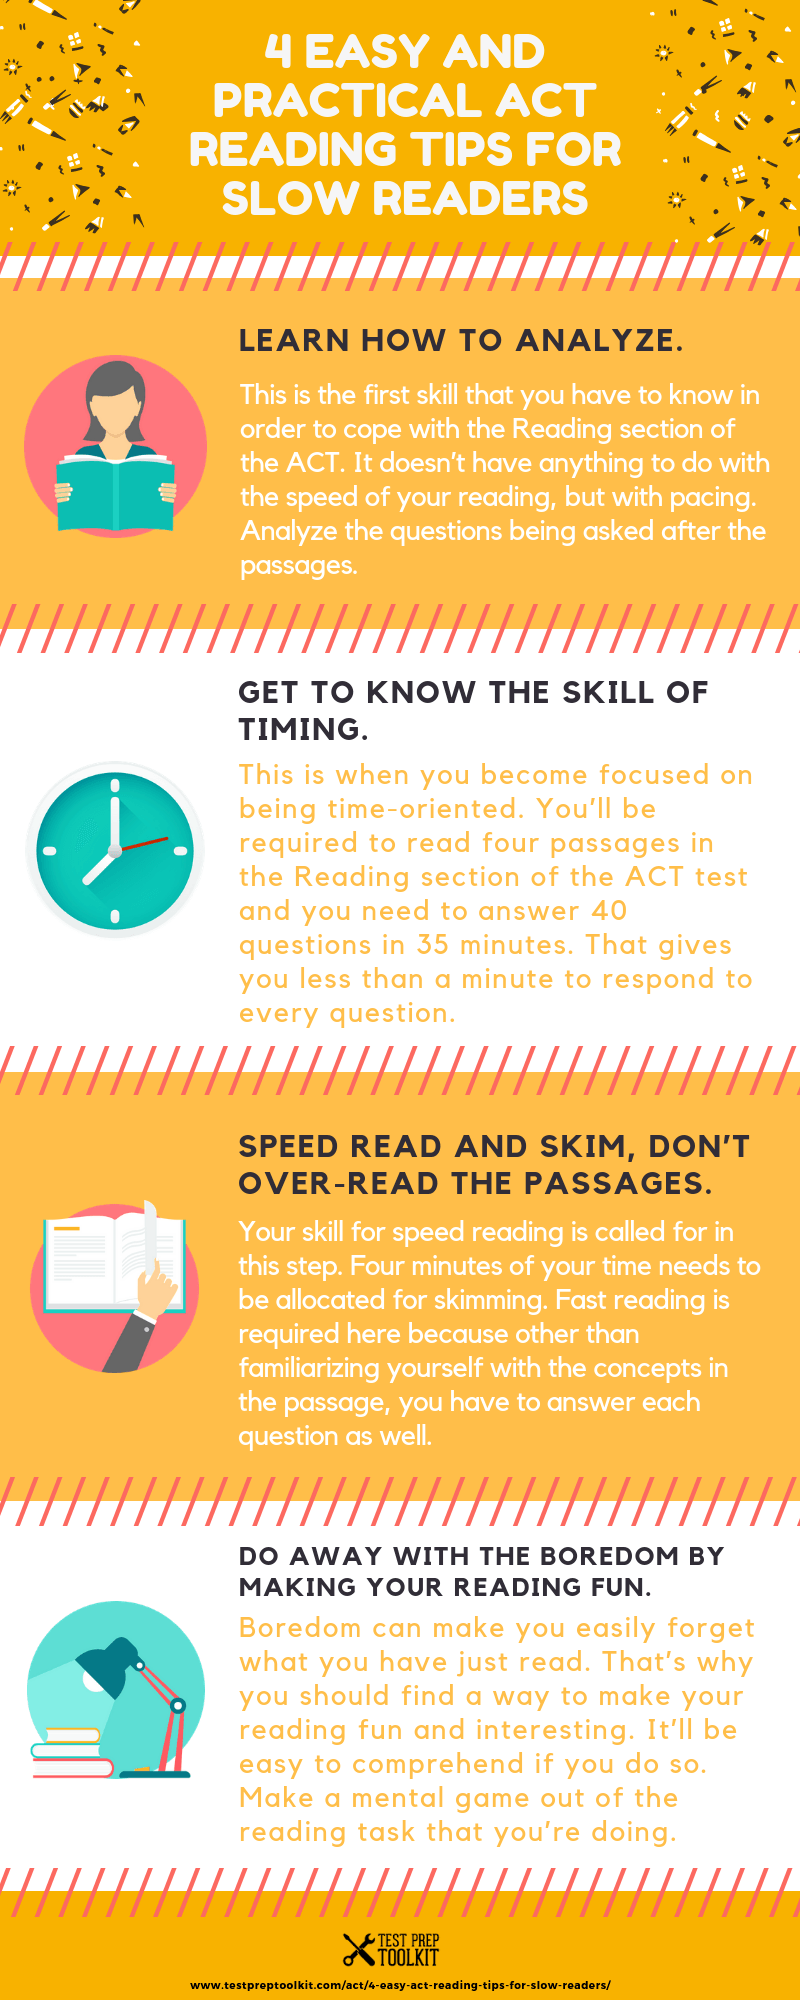 4 Easy And Practical ACT Reading Tips For Slow Readers